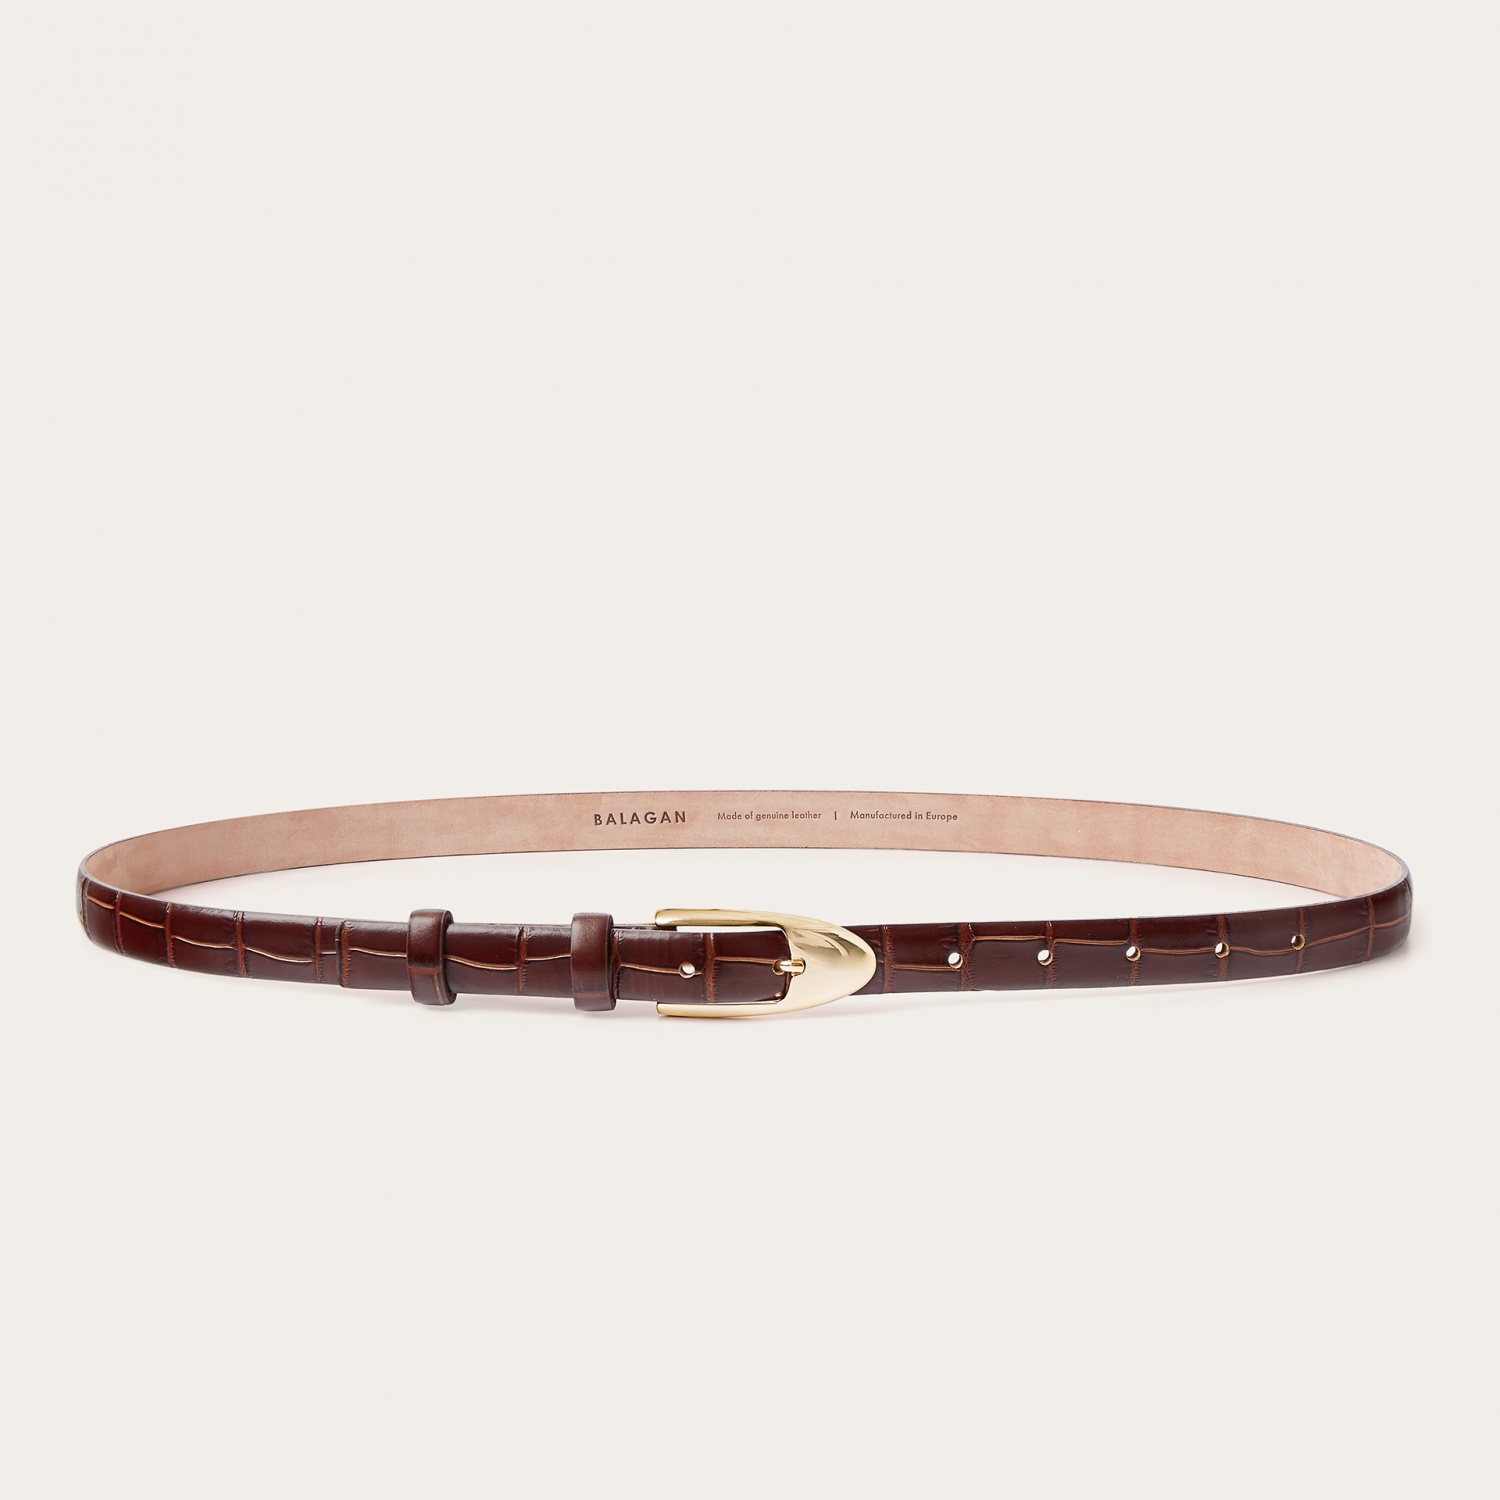  Thin belt with a buckle, brown croce pattern-4 